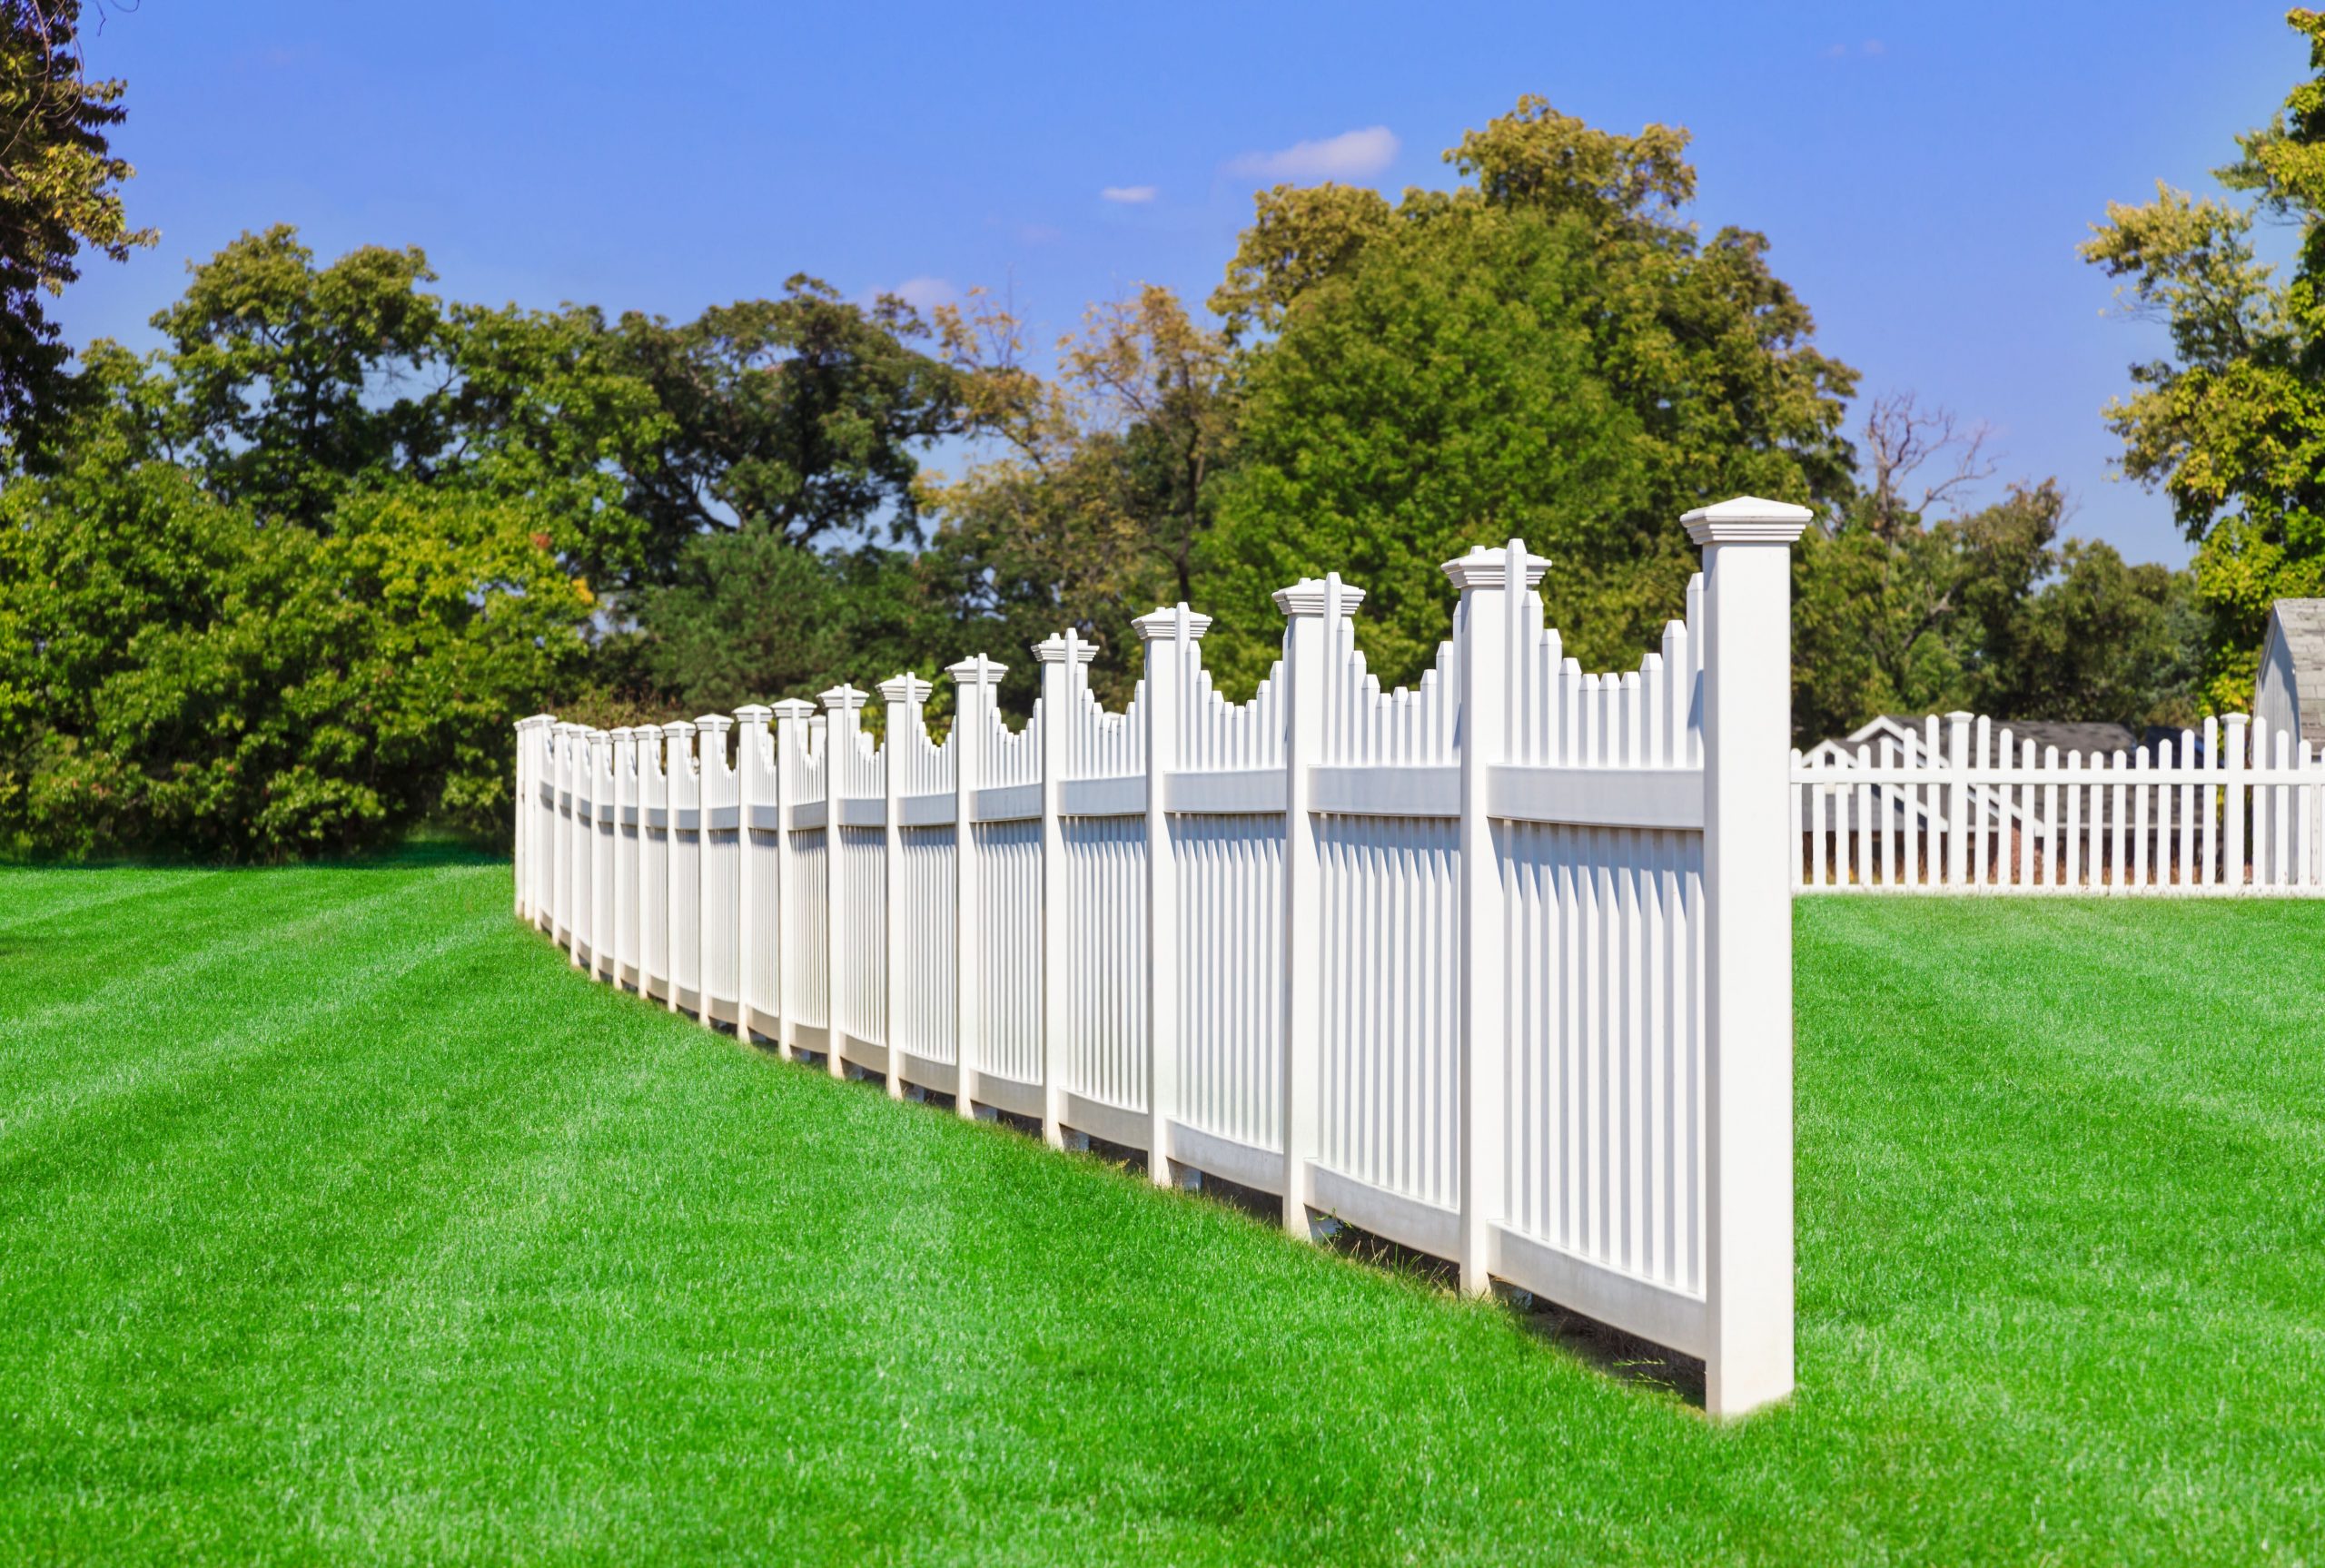 About Us Fence Installations In Okanagan Accurate Fencing